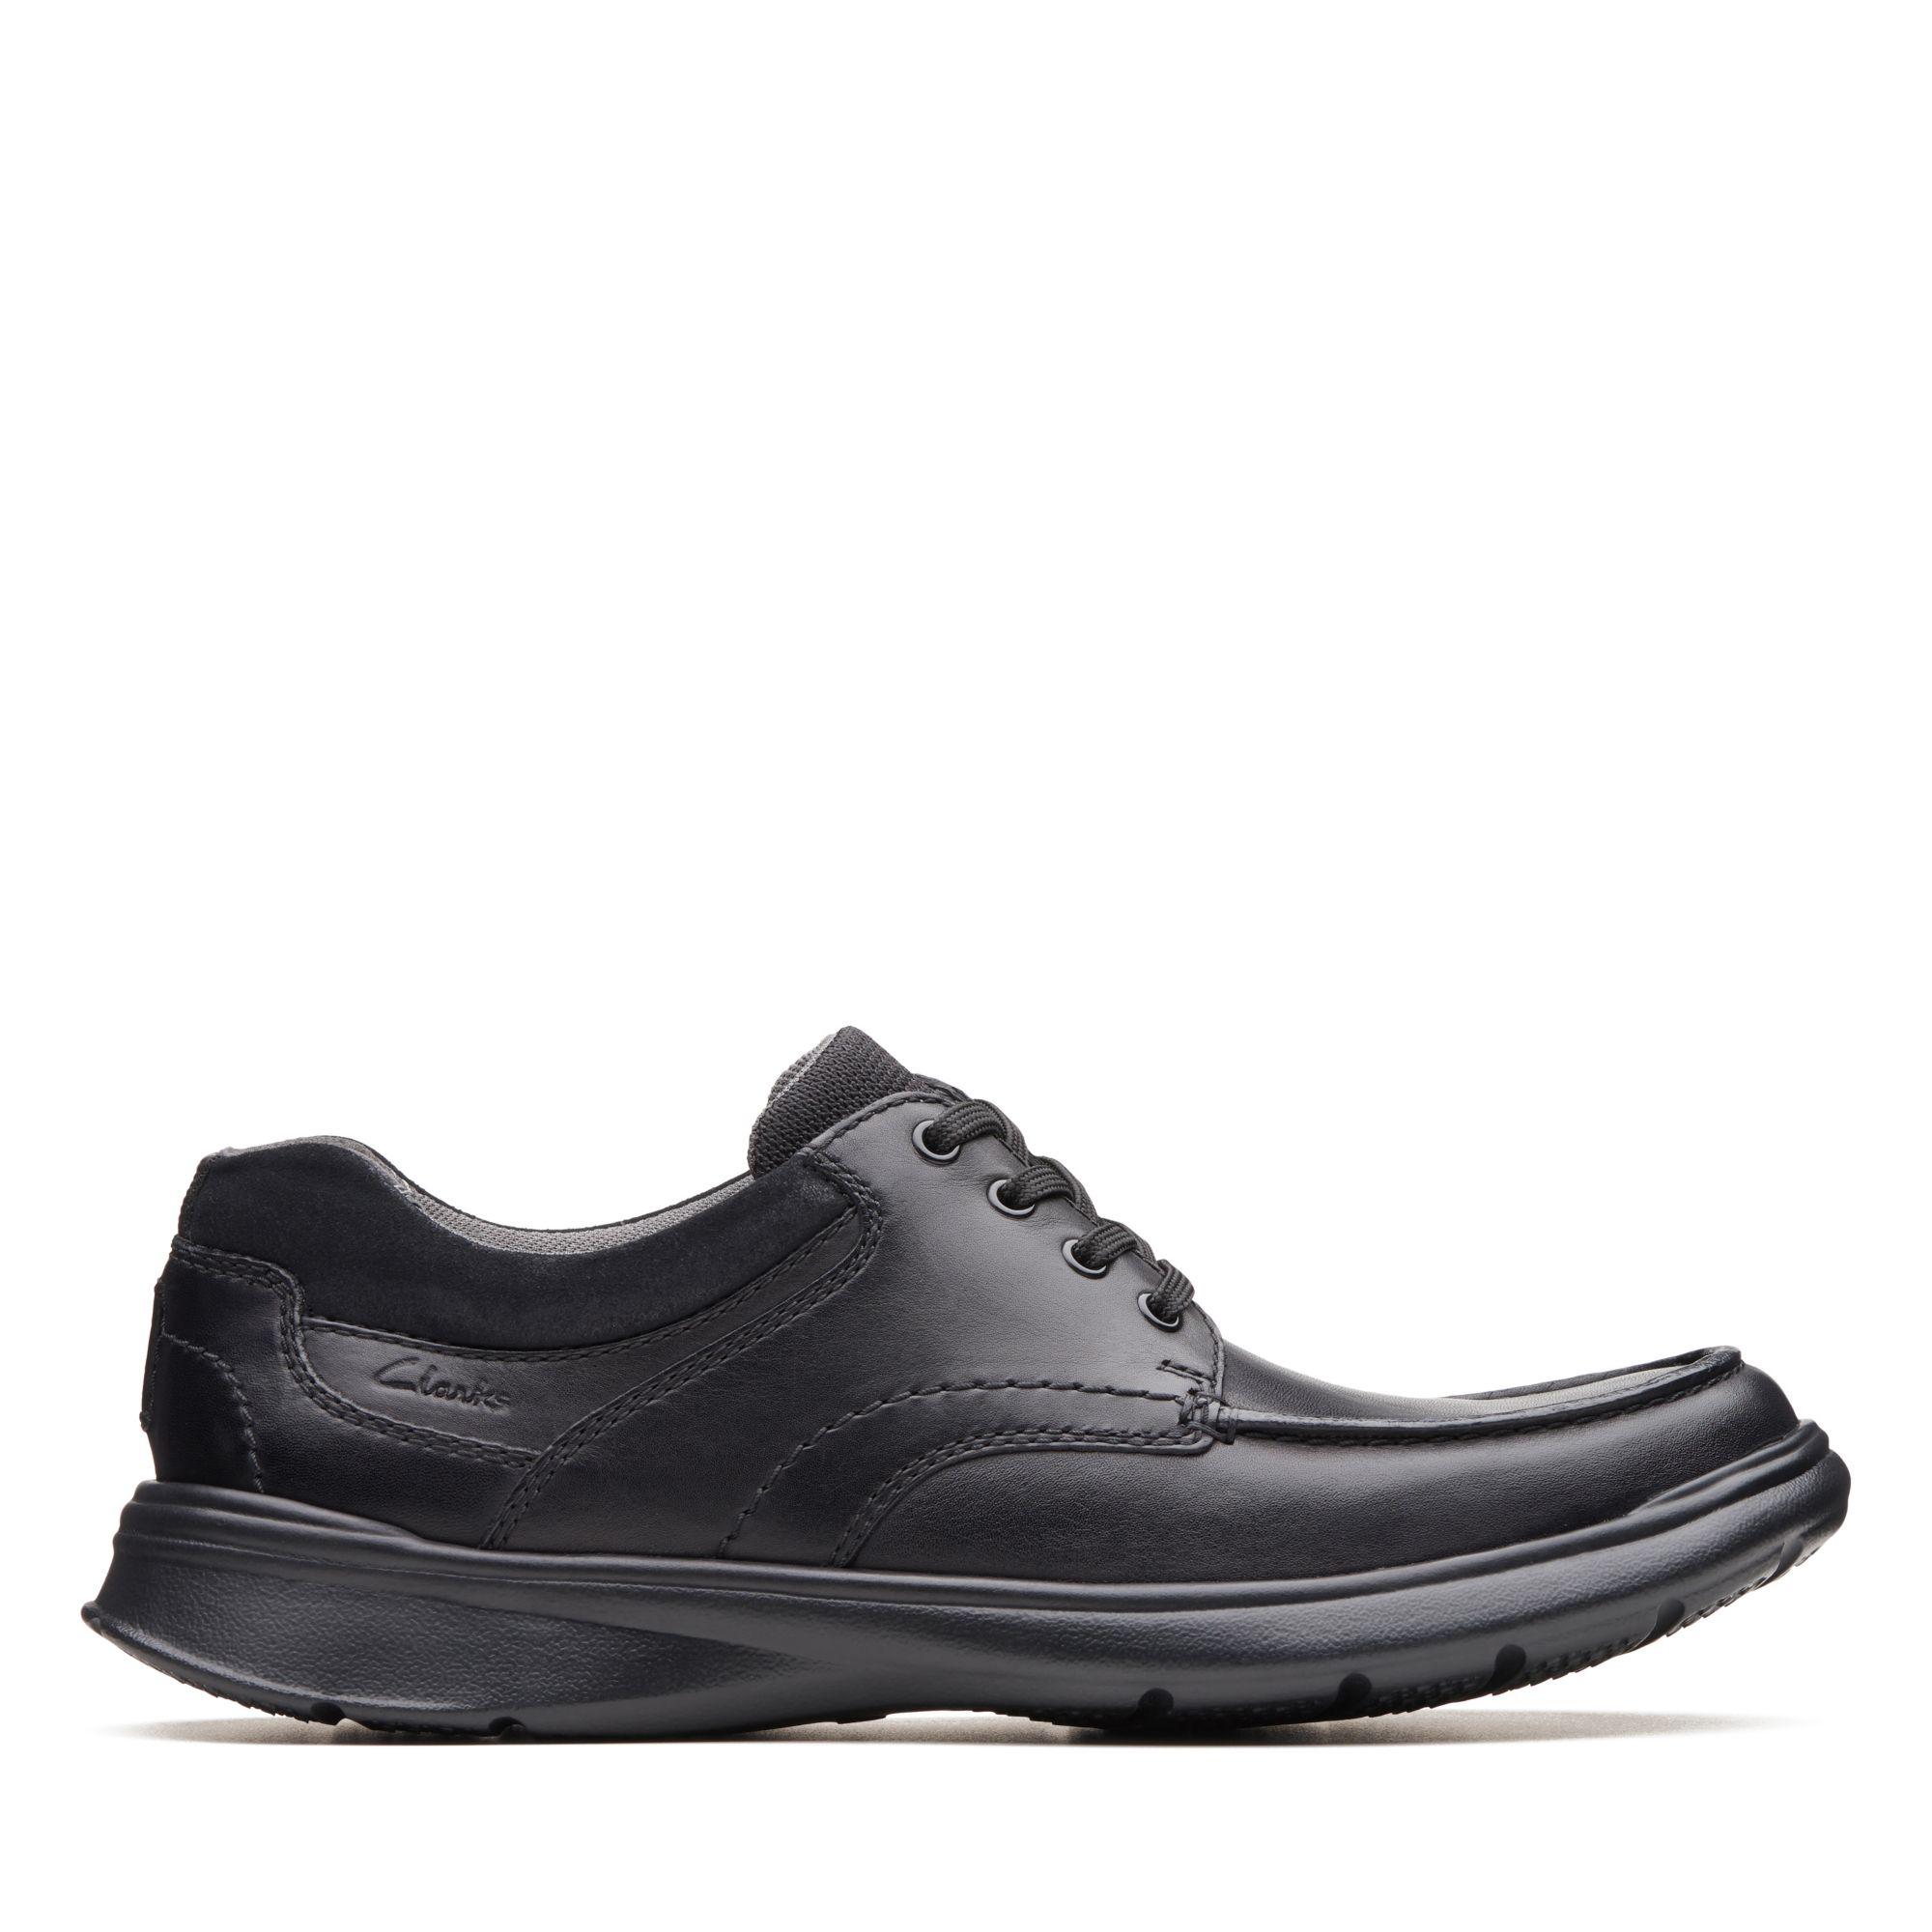 Clarks Leather Cotrell Edge in Black for Men - Lyst